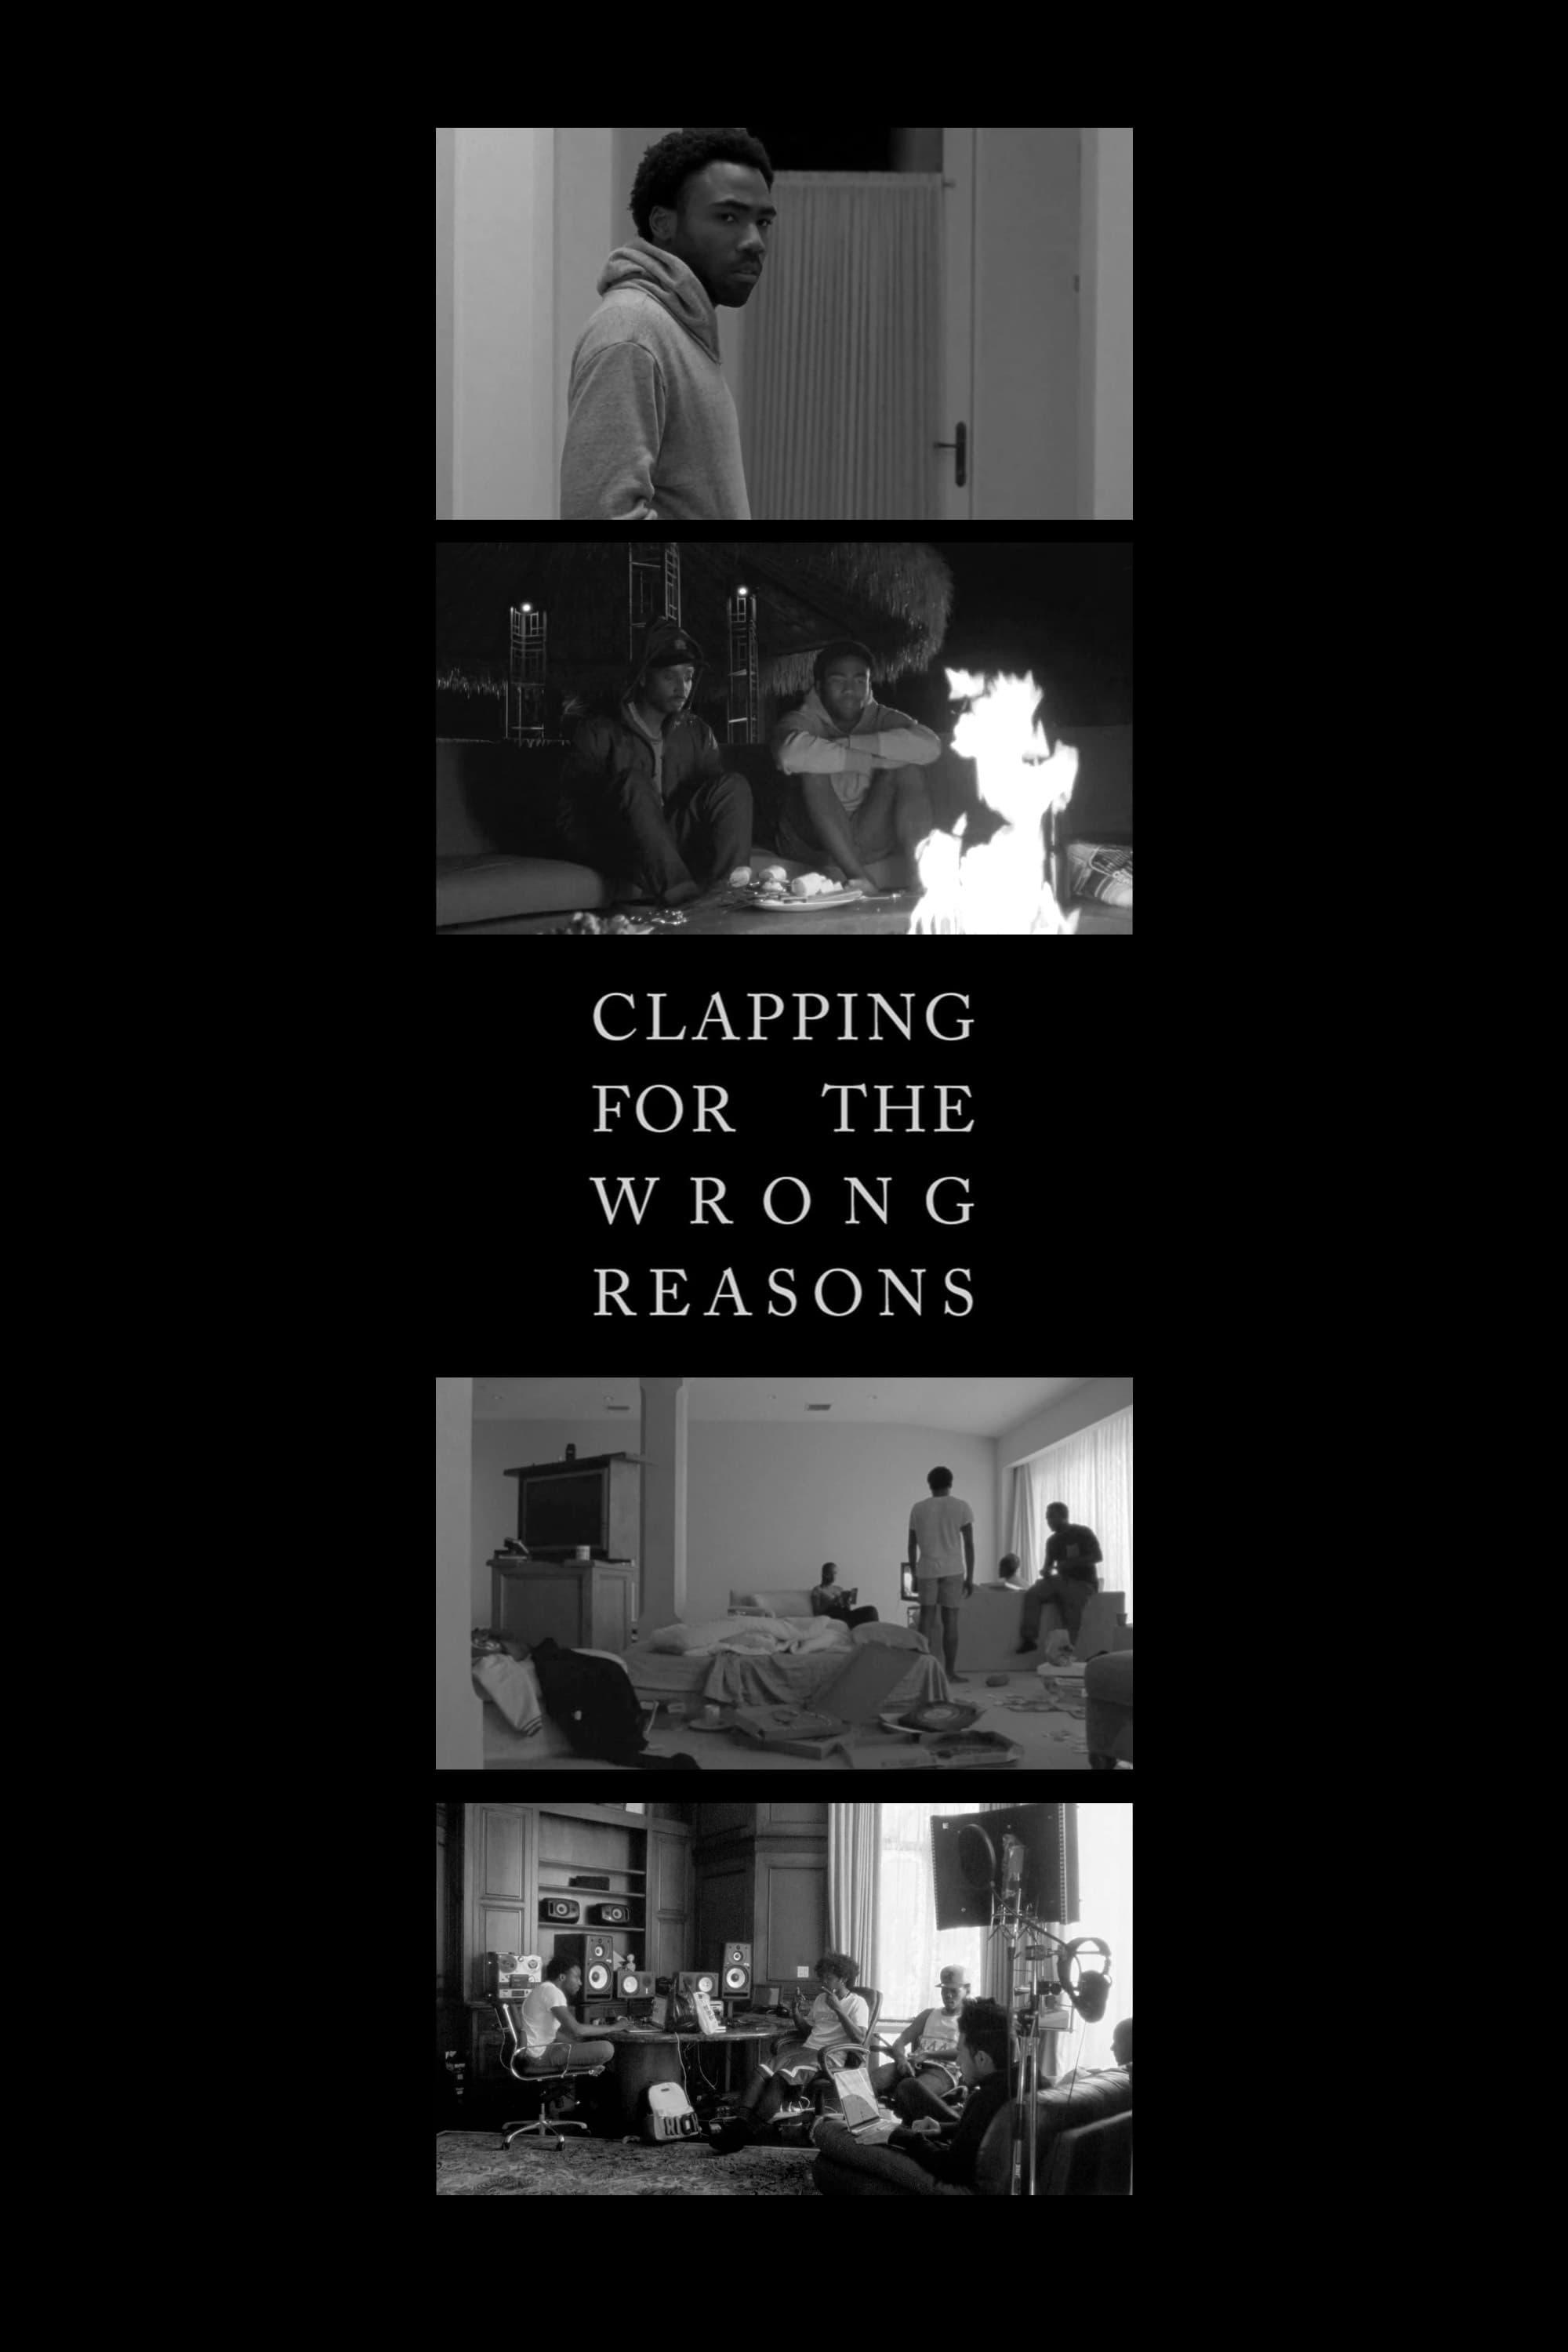 Clapping for the Wrong Reasons poster